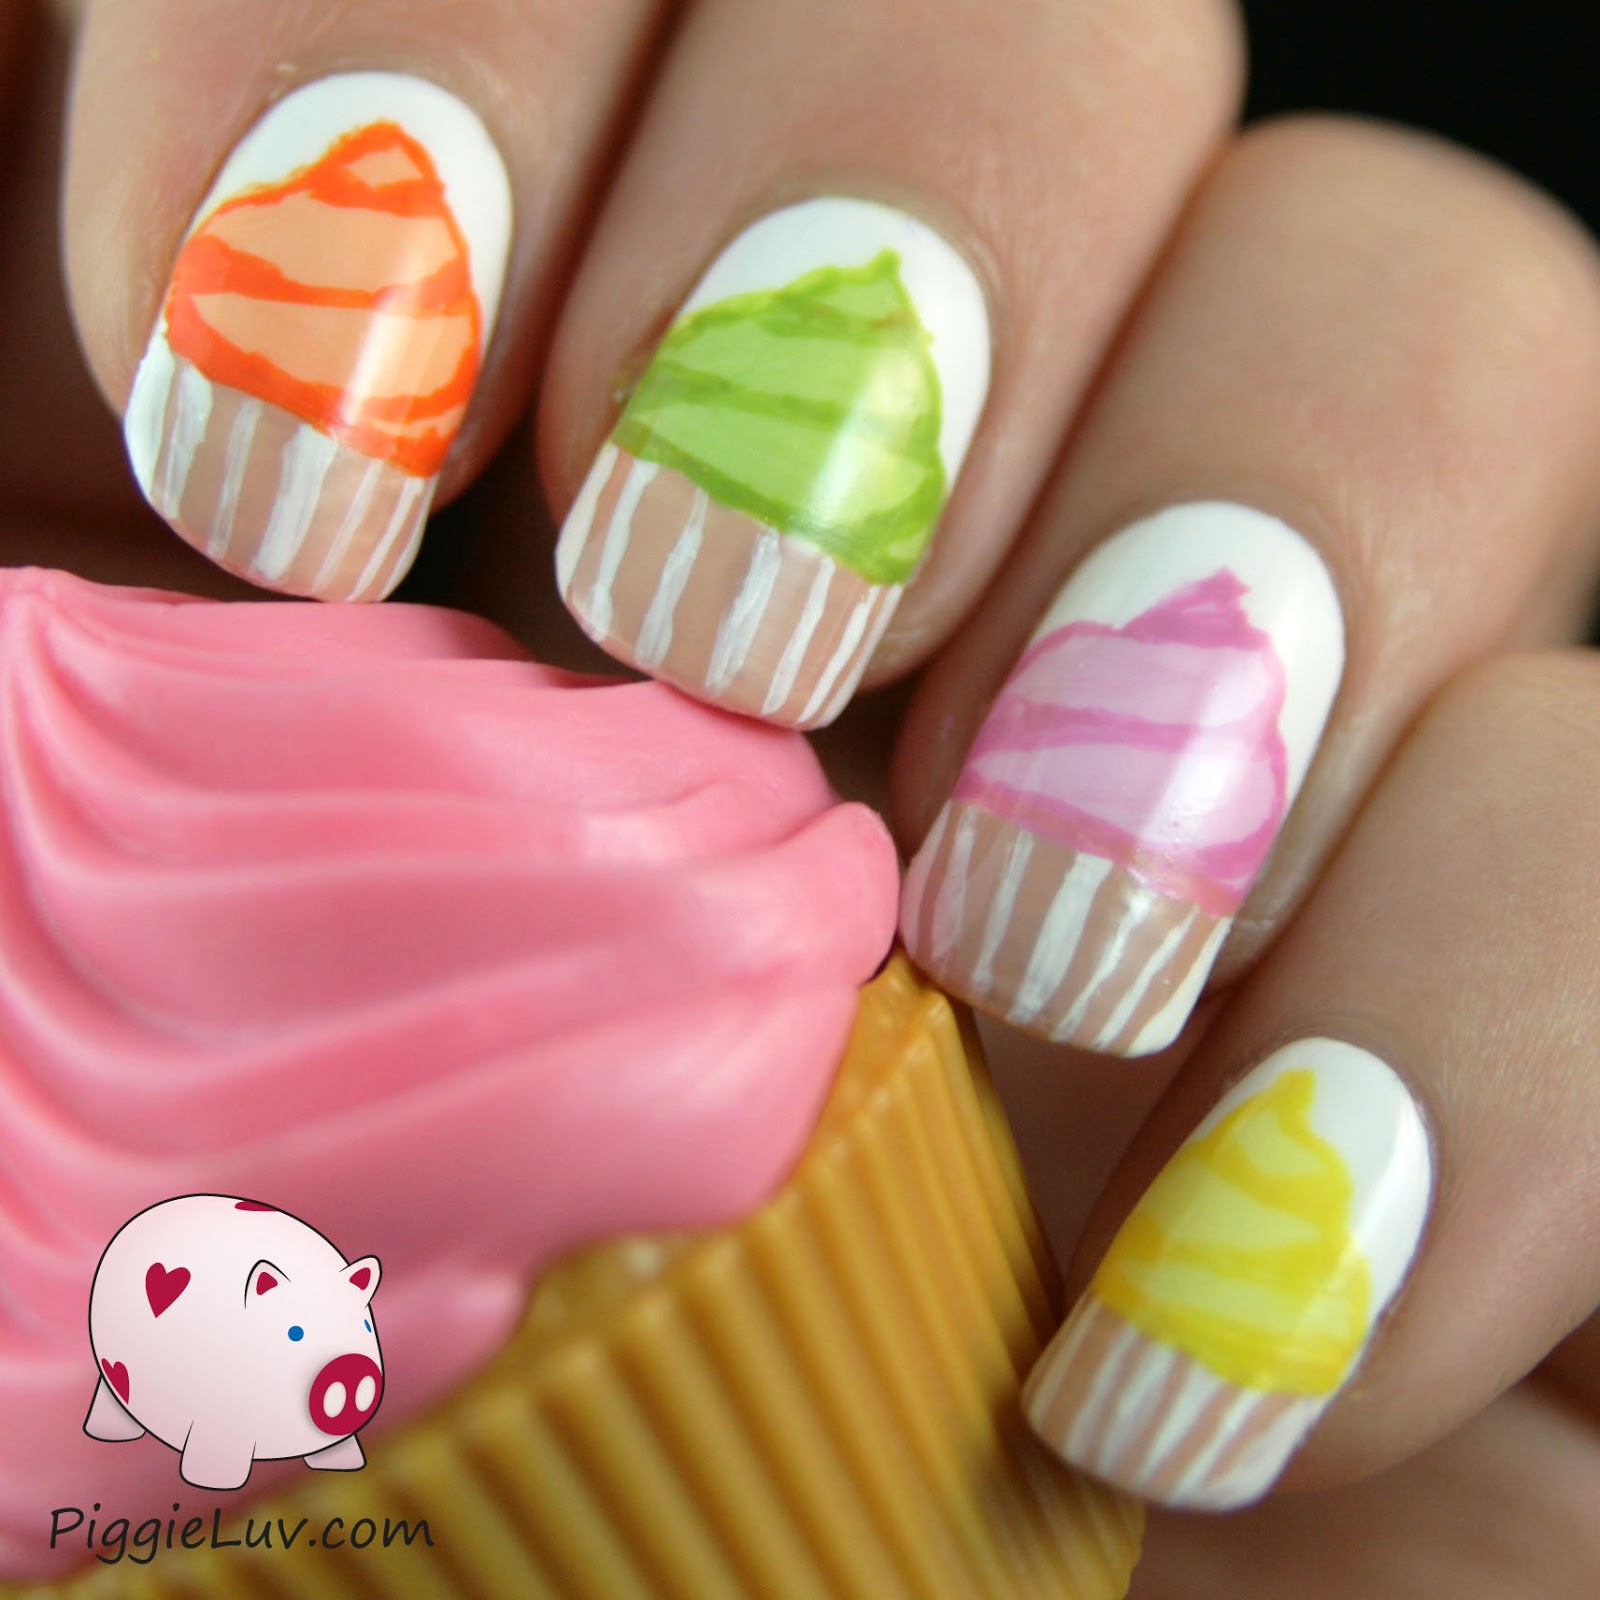 PiggieLuv: More cupcakes on my nails! Hand painted nail art